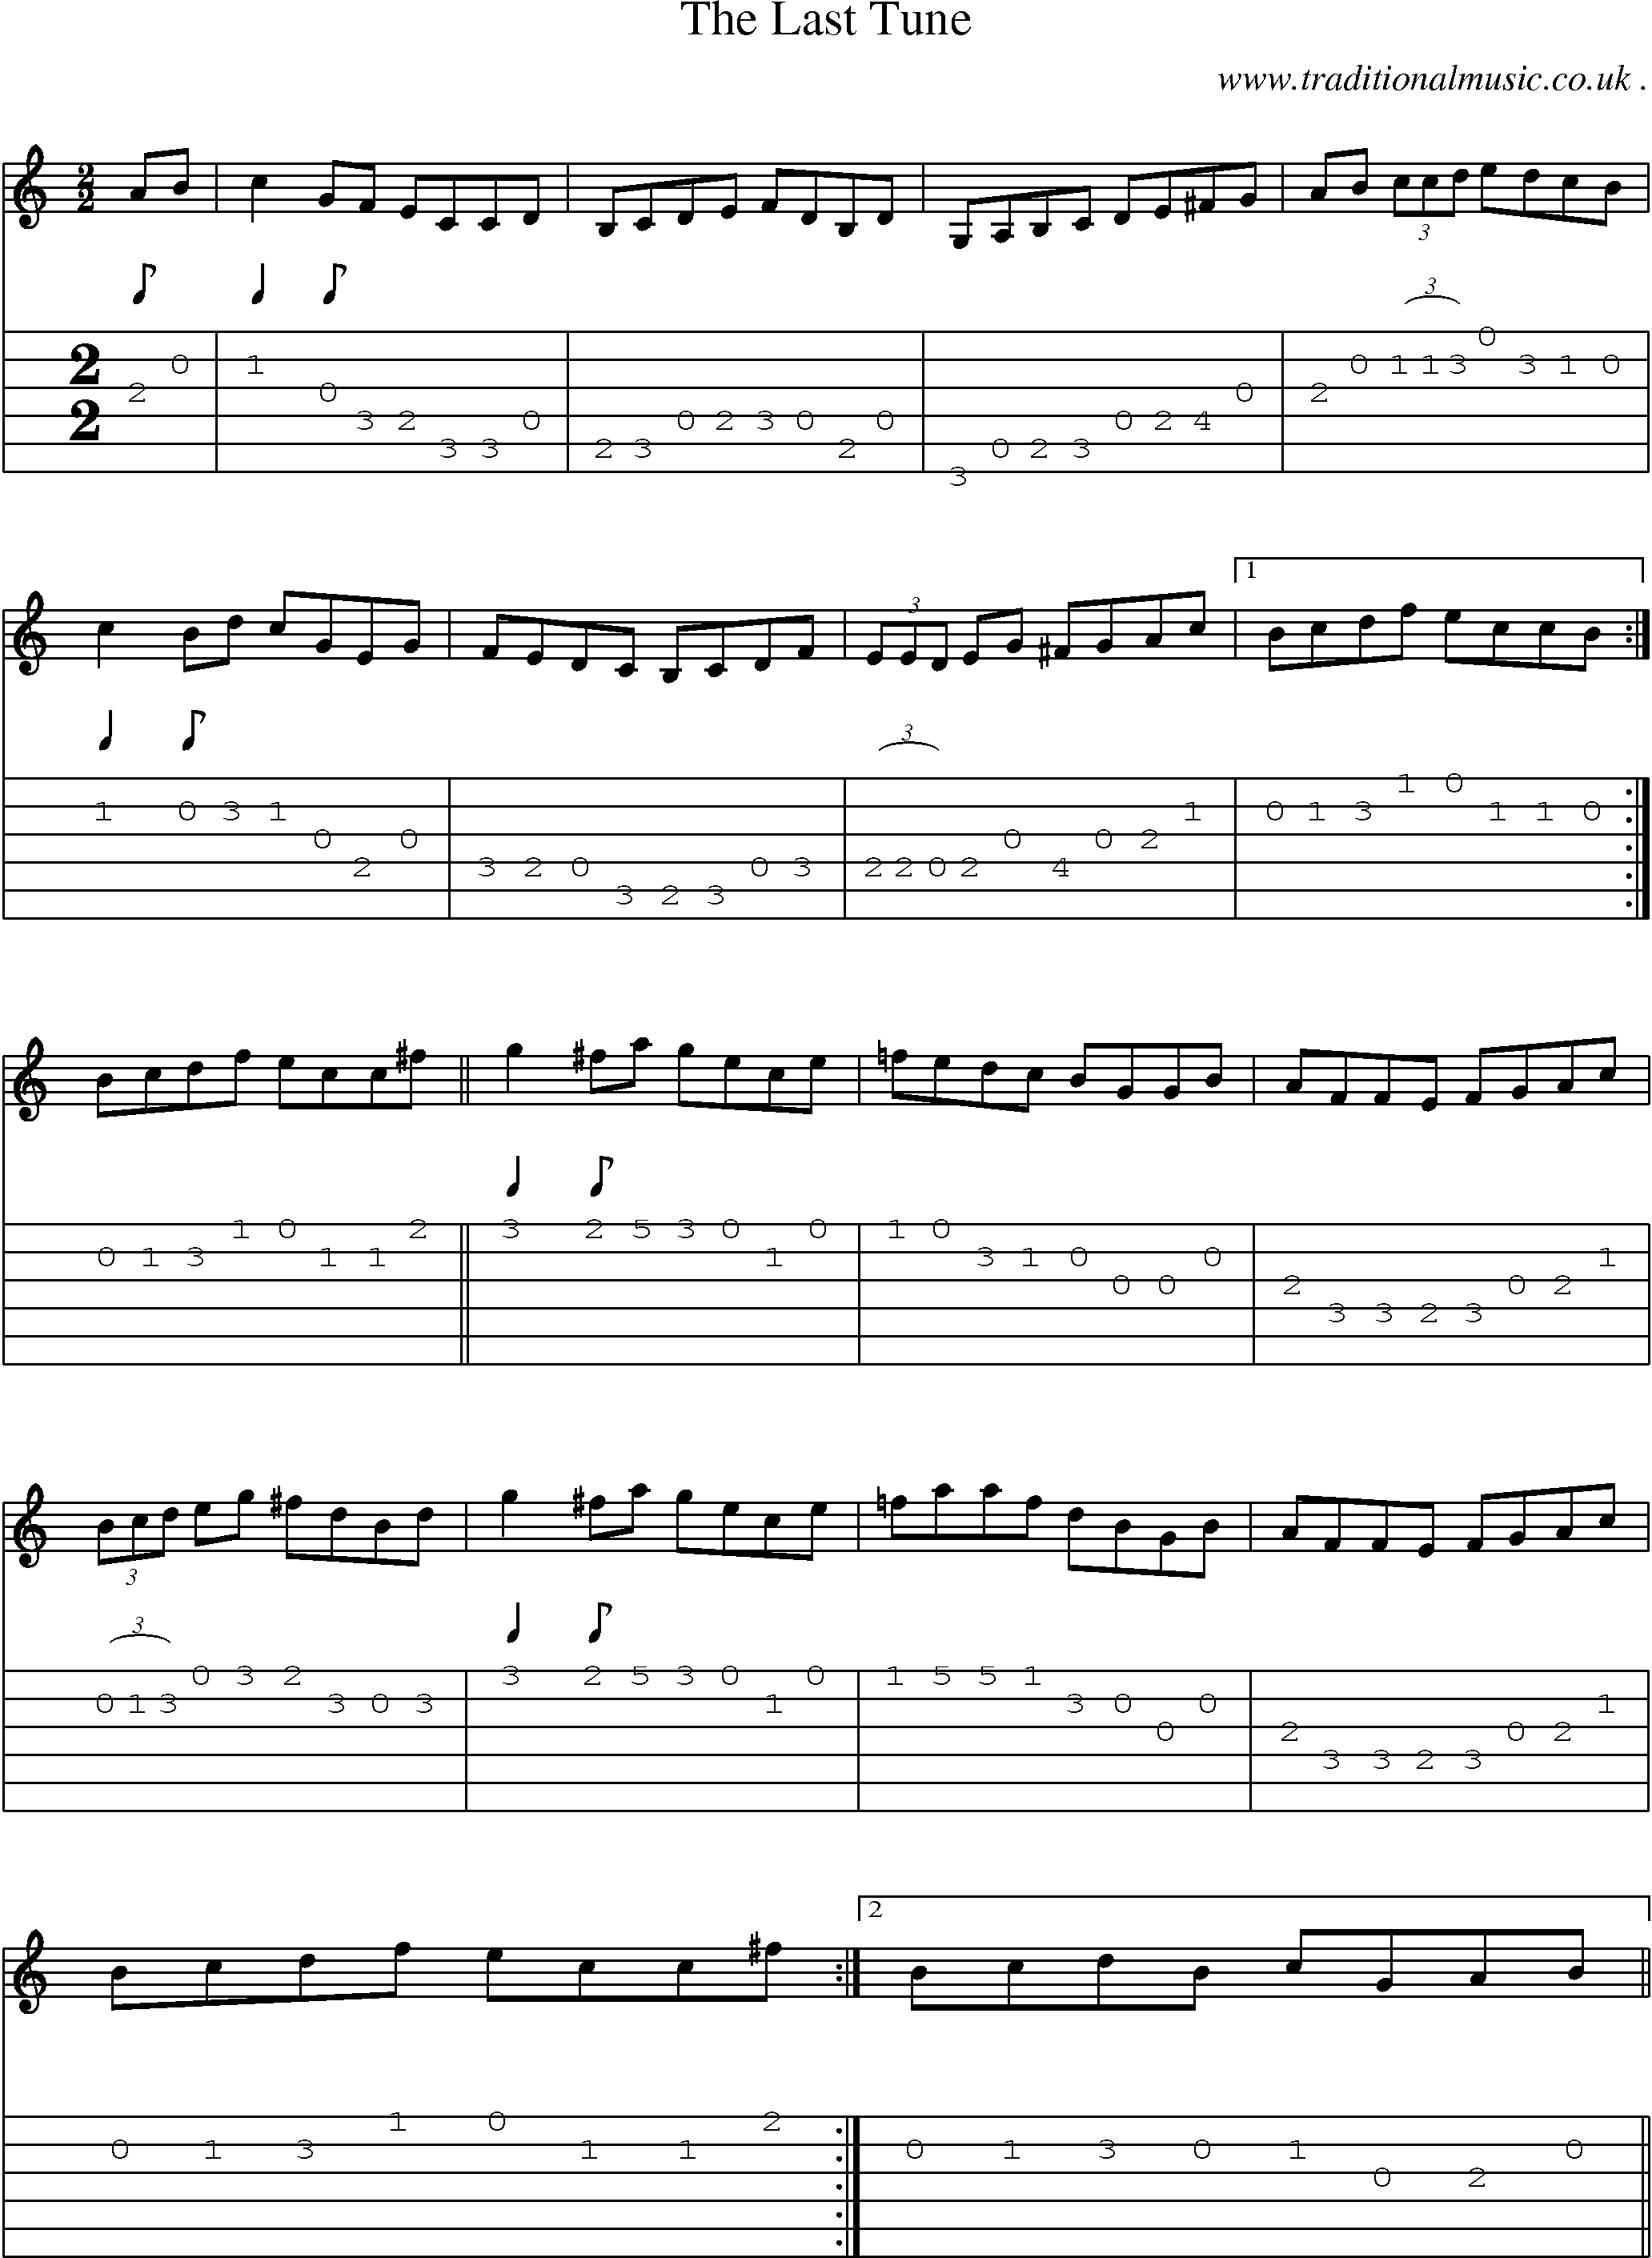 Sheet-Music and Guitar Tabs for The Last Tune